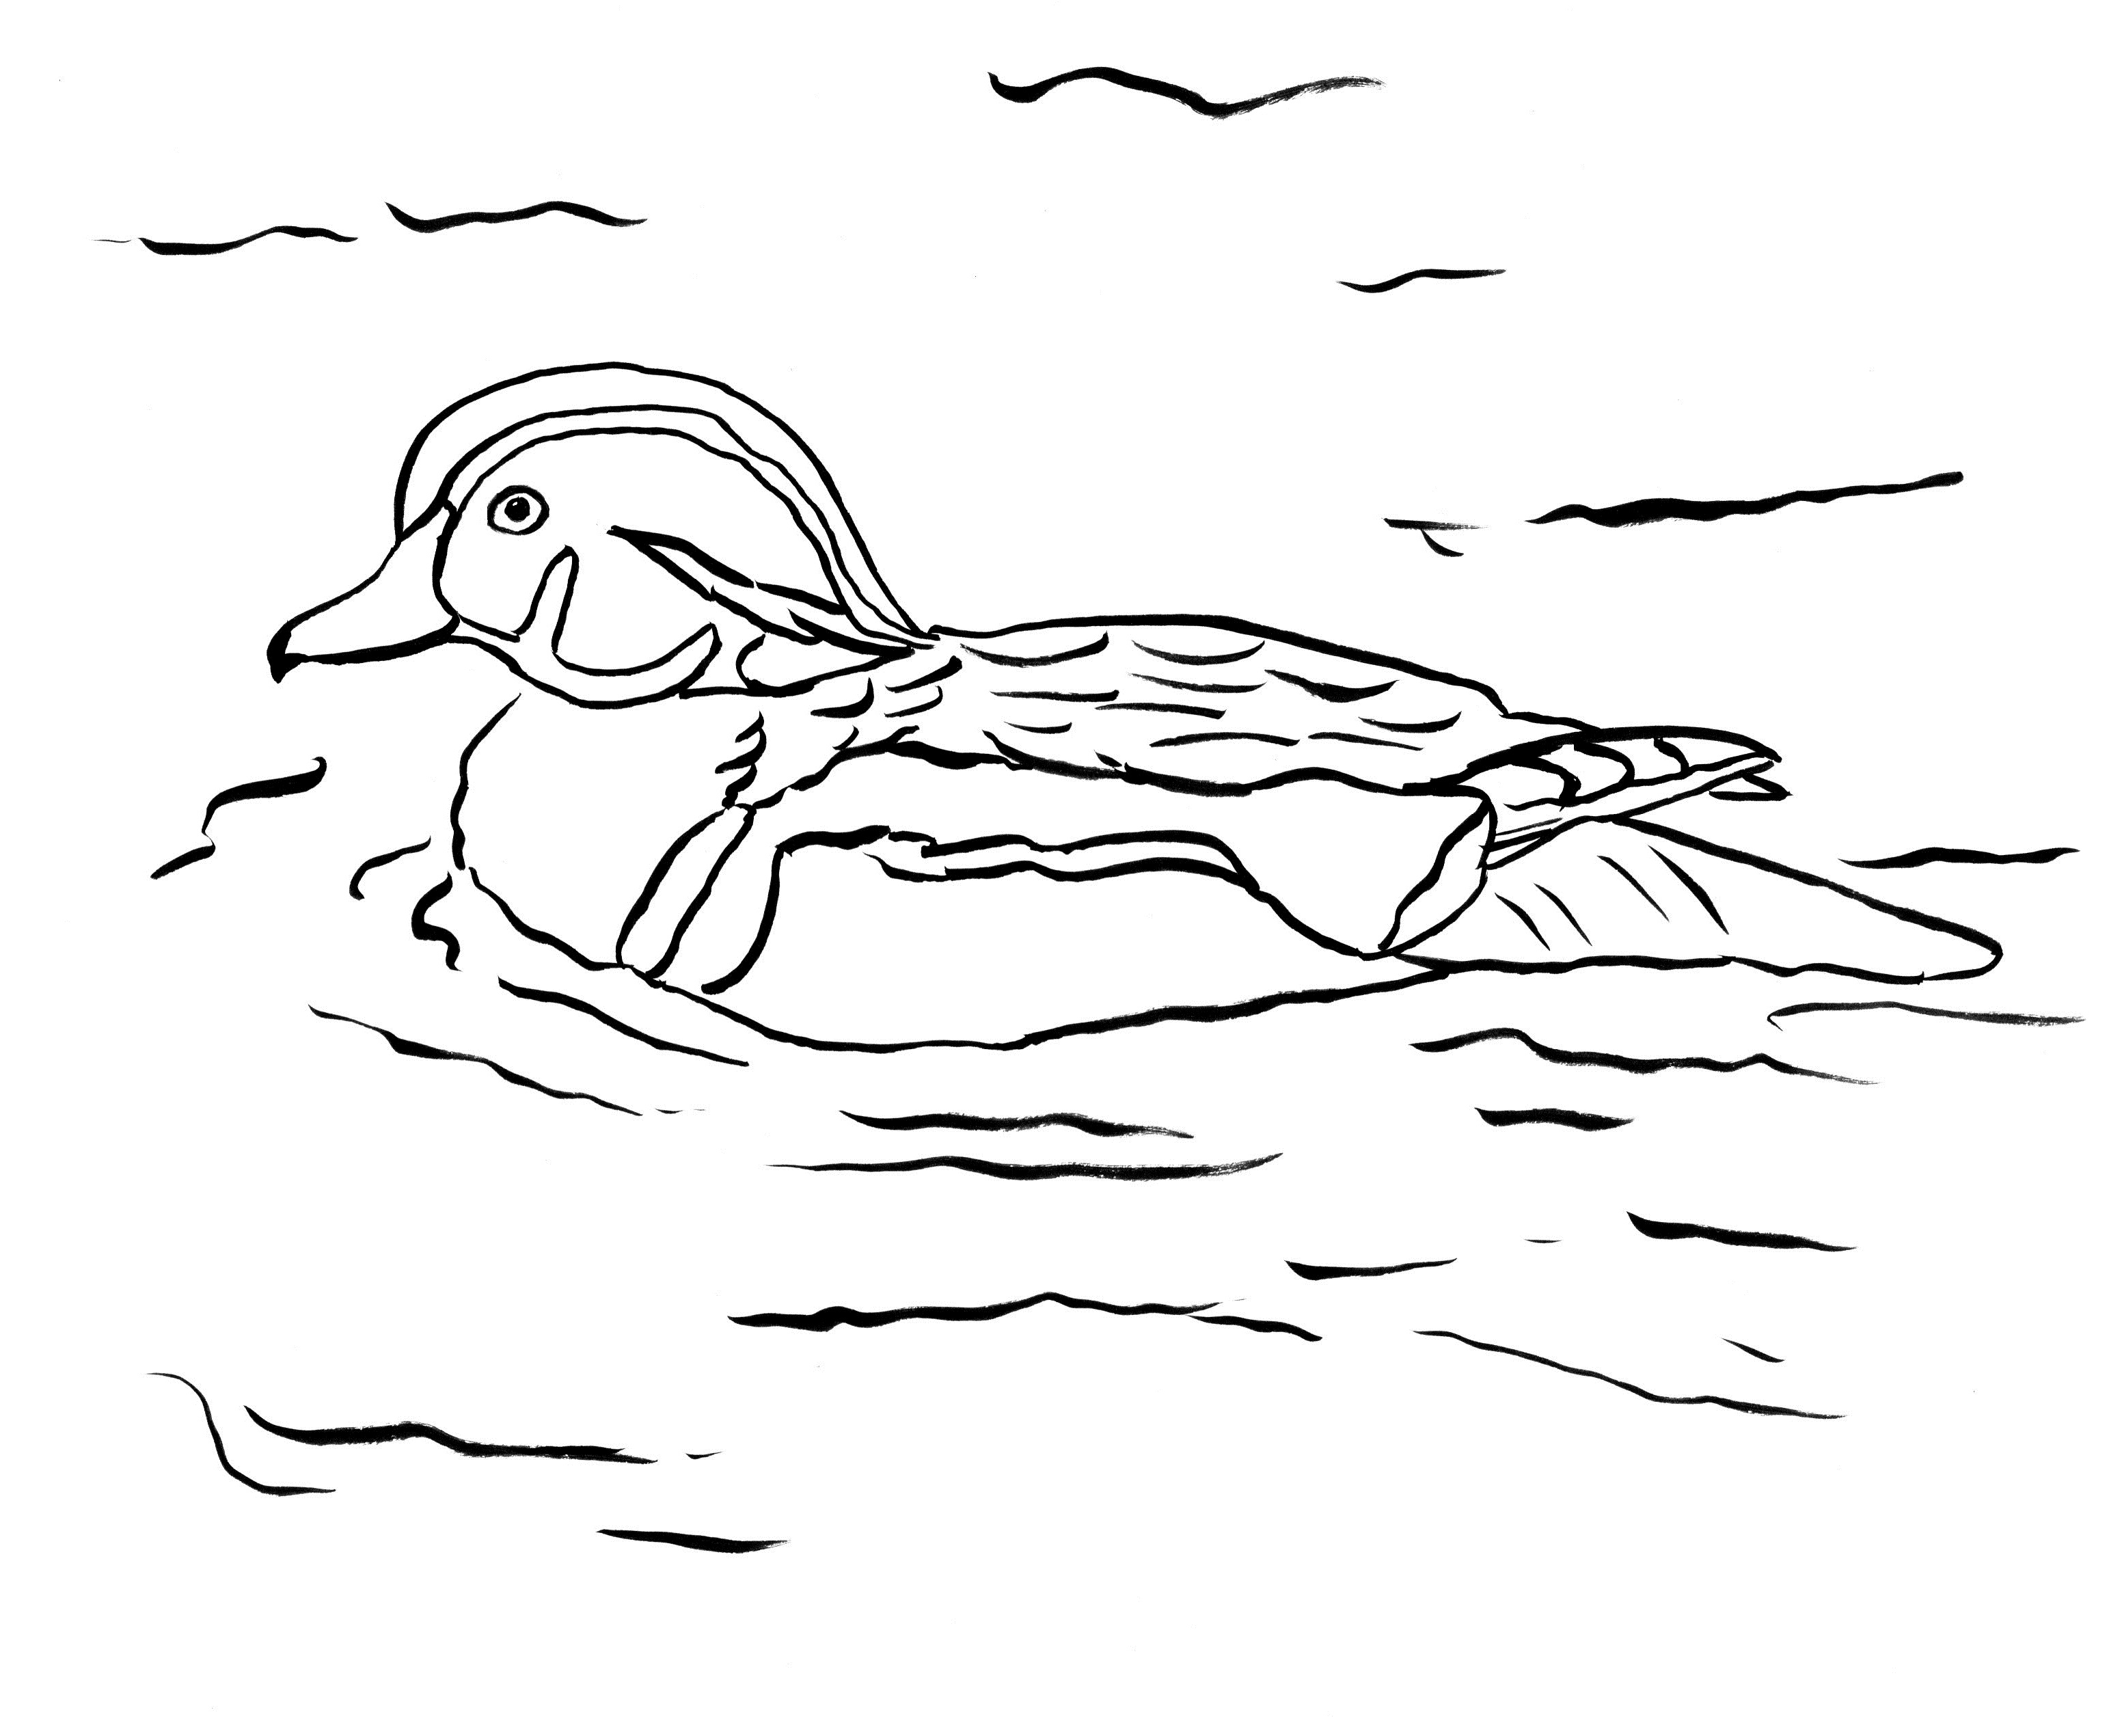 Wood Duck Coloring Page - Art Starts for Kids